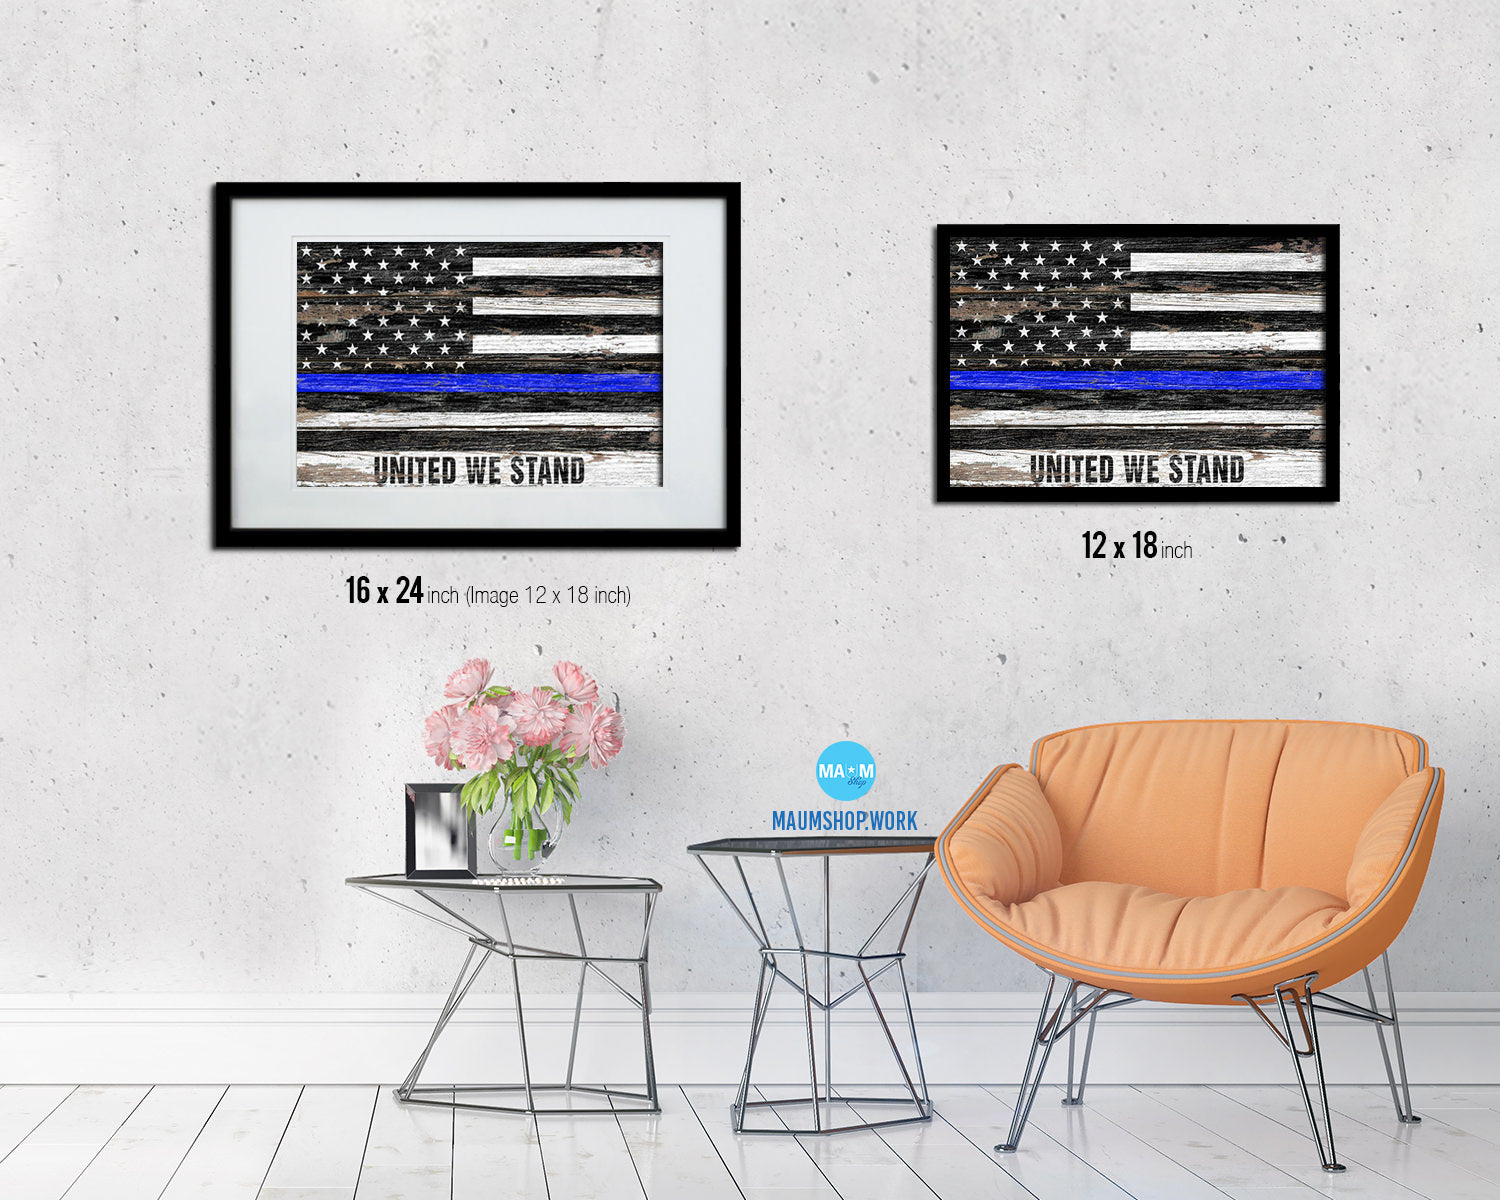 Thin Blue Line Police & Thin Red Line Firefighter Respect & Honor Law Enforcement Wood Rustic Flag Art